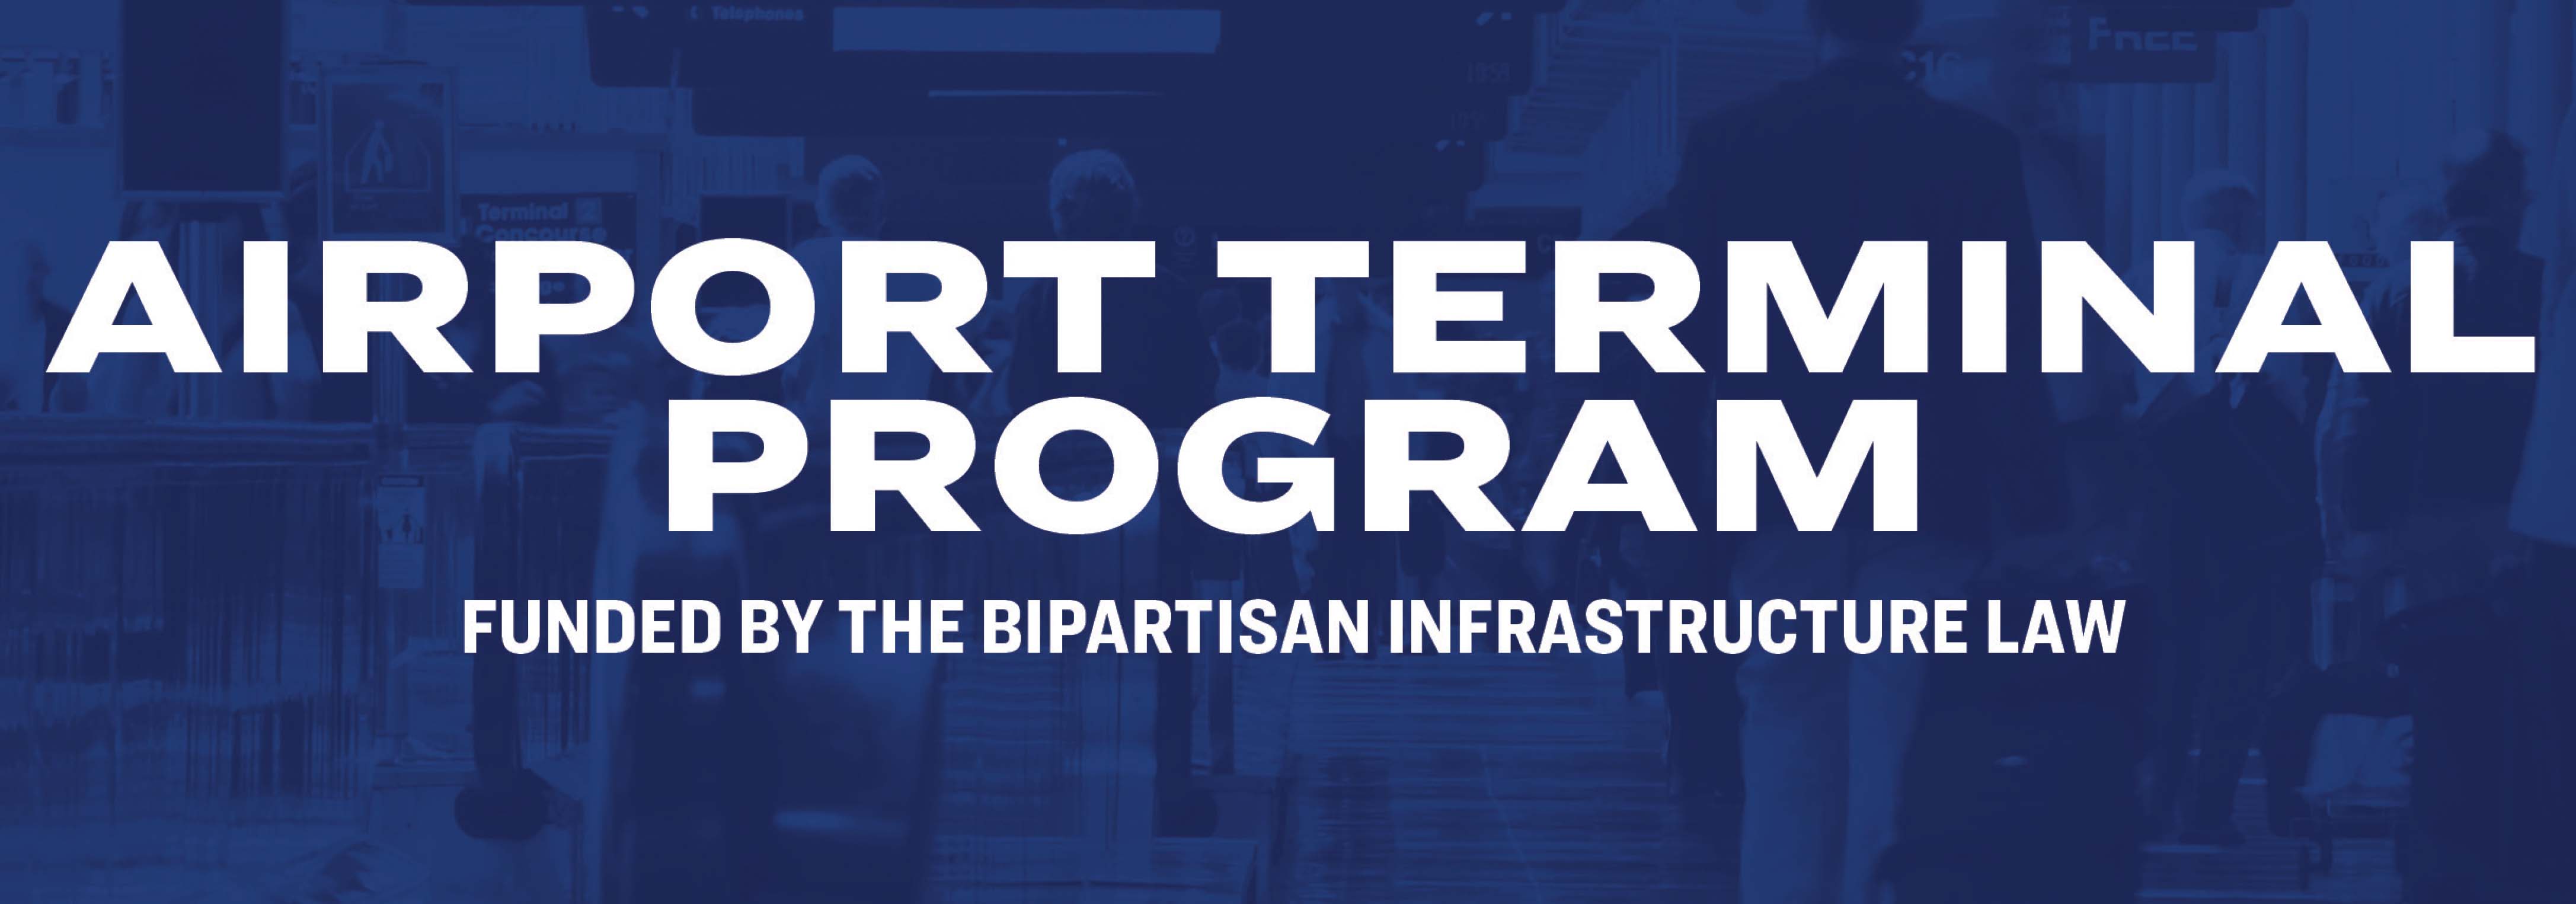 airport terminal program funded by the bipartisan infrastructure law